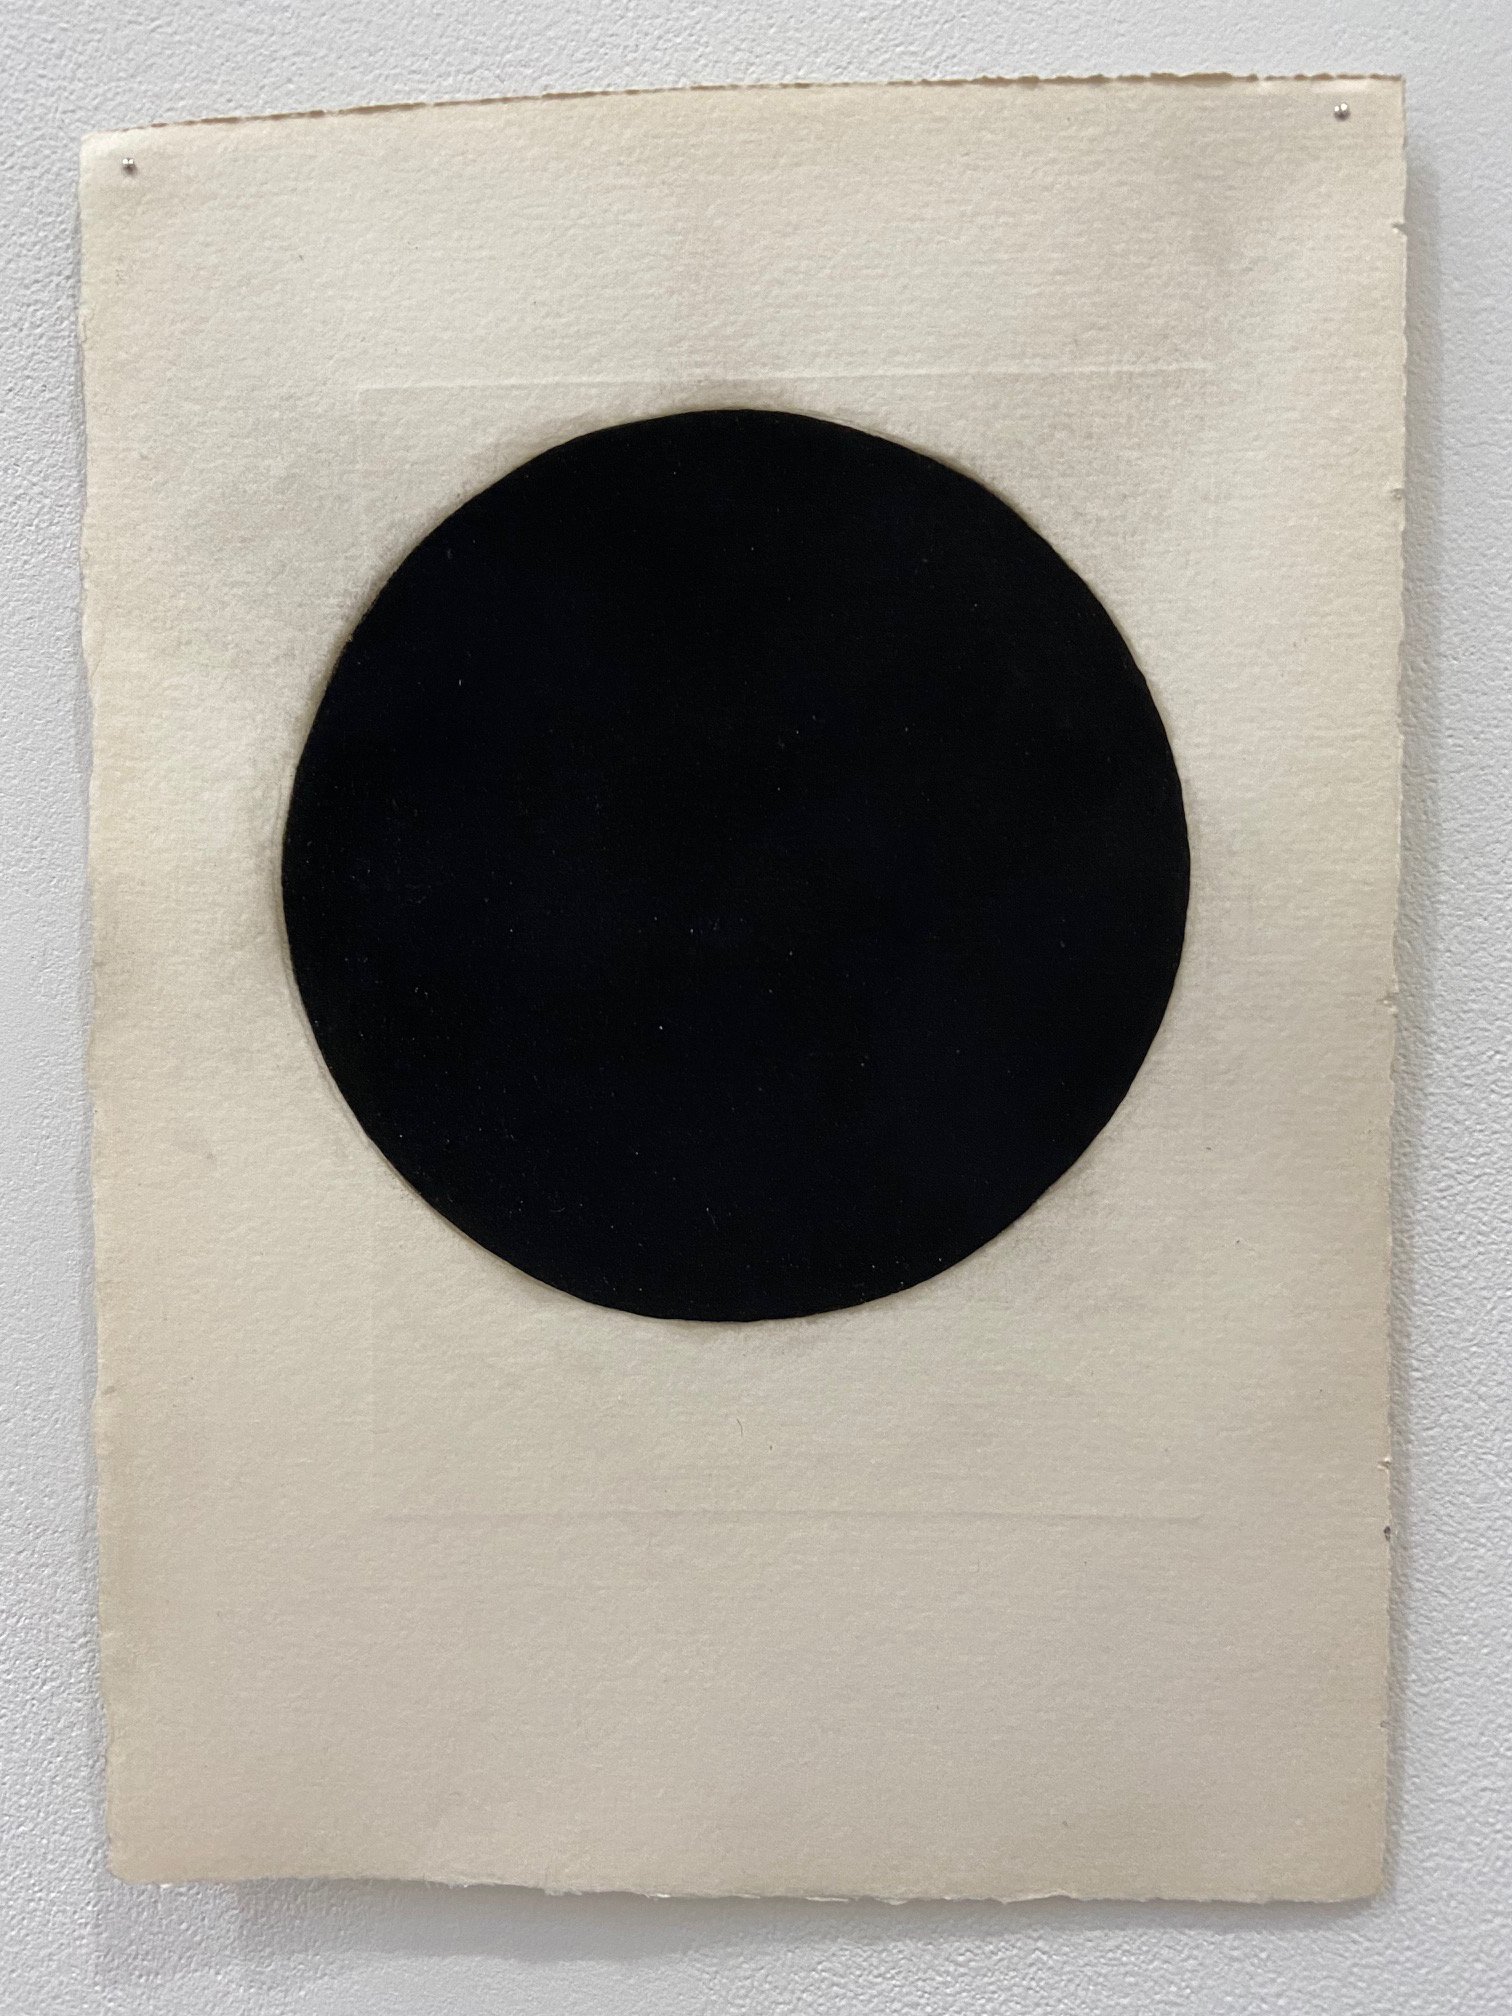   new moon 01  2021 soot, lampblack gouache, discarded book plate 9 x 6 inches   